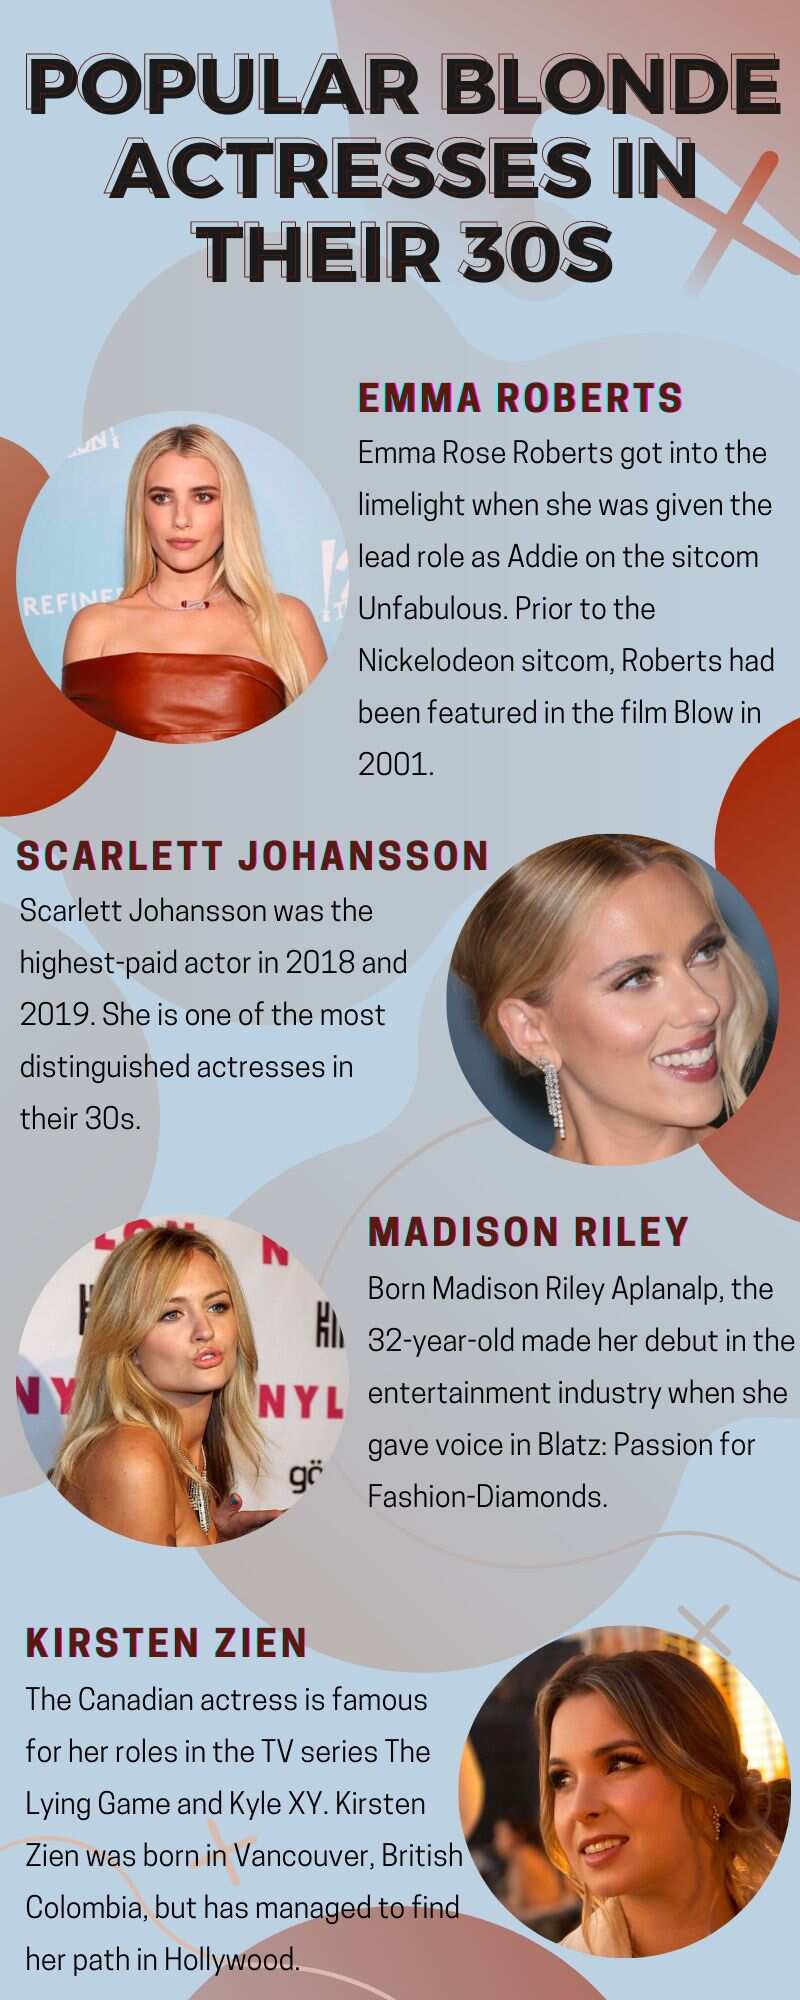 20 popular blonde actresses in their 30s at the height of their careers -  